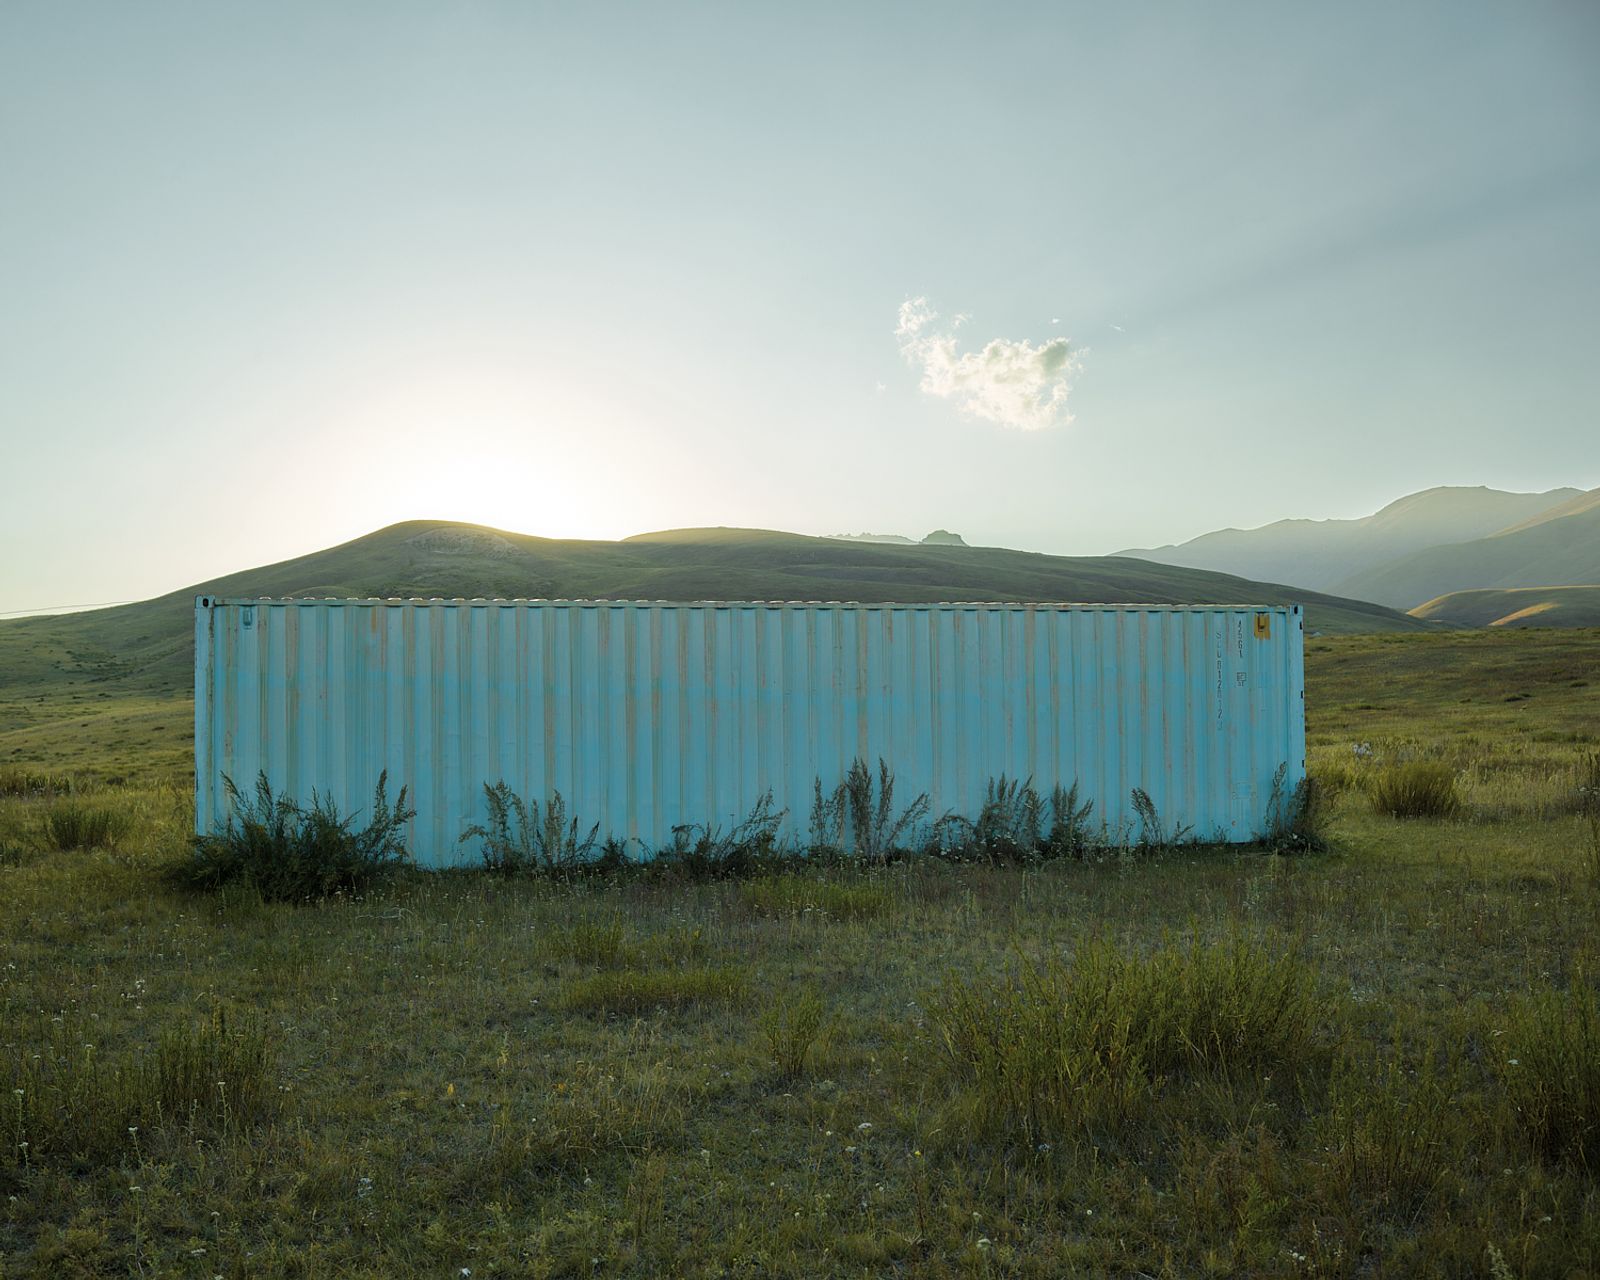 © Louise Amelie - Image from the MISSING MEMBER - Kyrgyzstan, A Country On The Move photography project